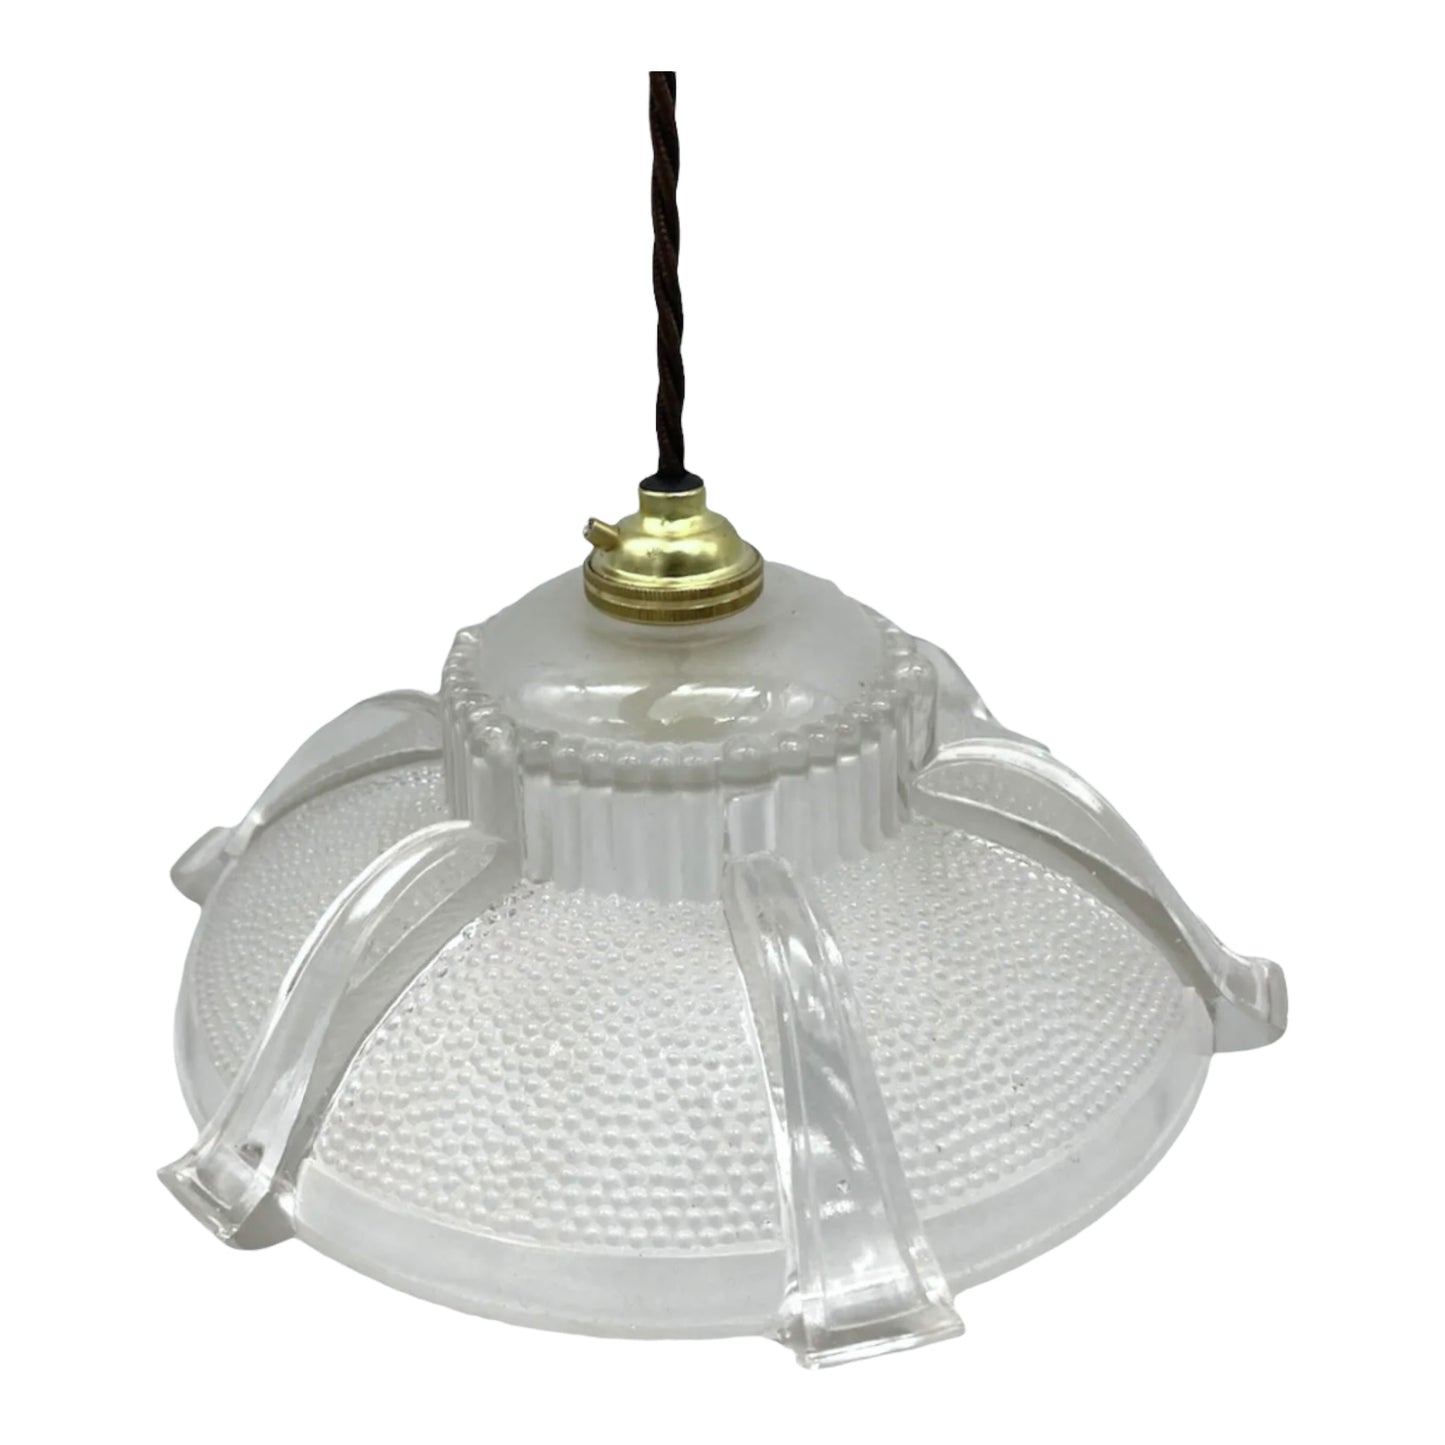 Vintage French Ceiling Pendant Light Shade, Art deco Lampshade with New Twisted Wiring (415)